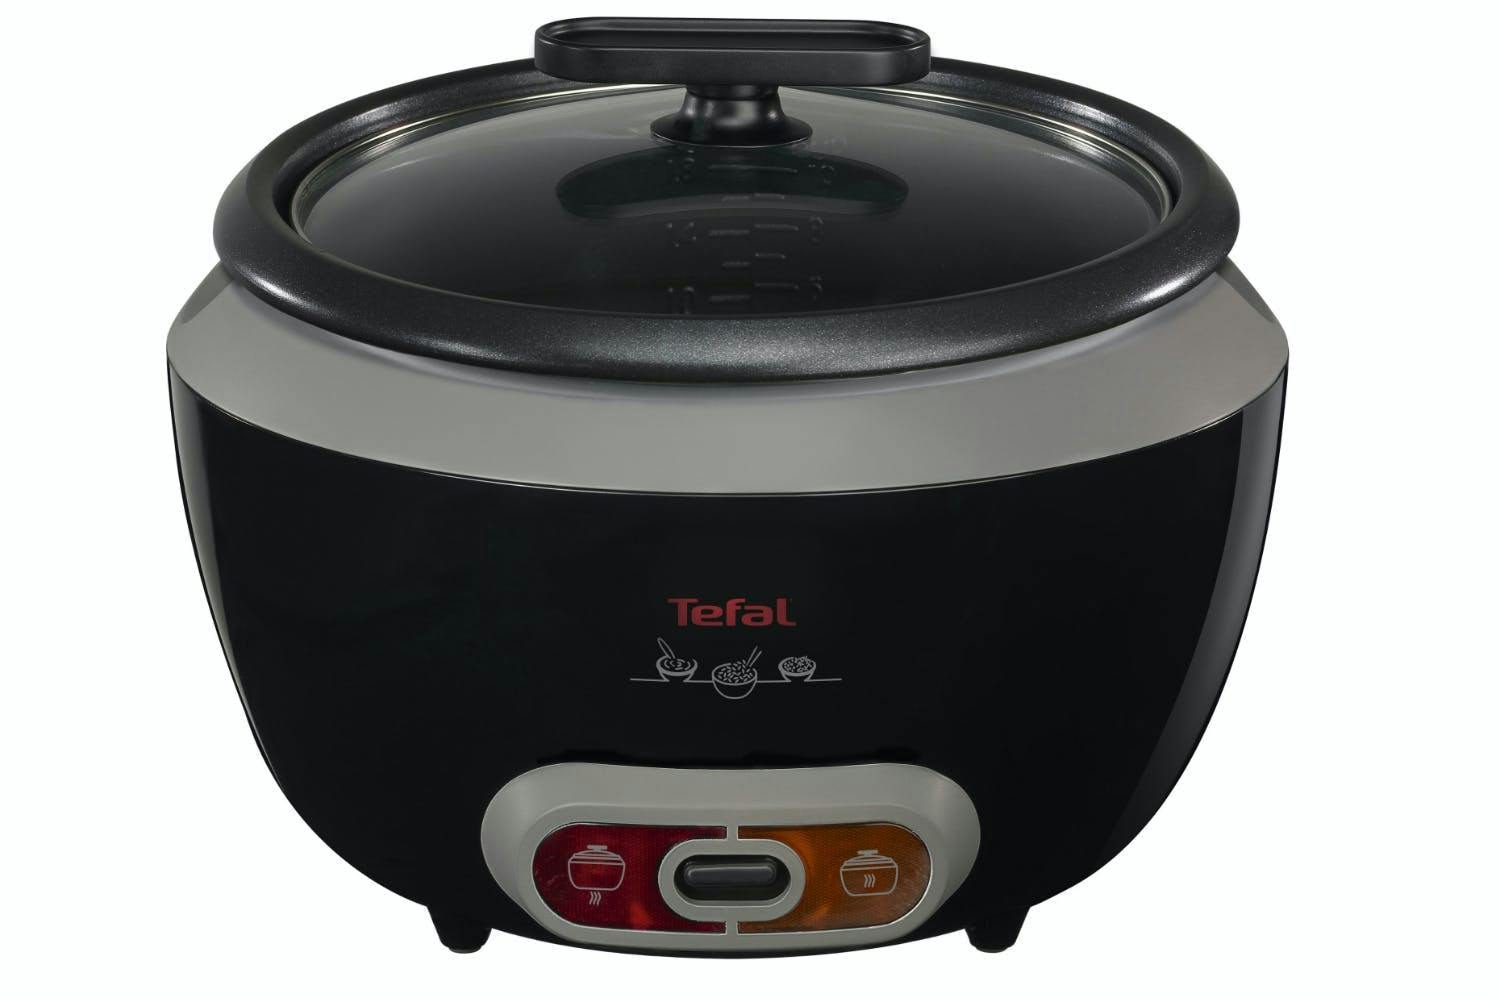 Tefal 1.8L Cooltouch Rice Cooker | RK1568UK | Black